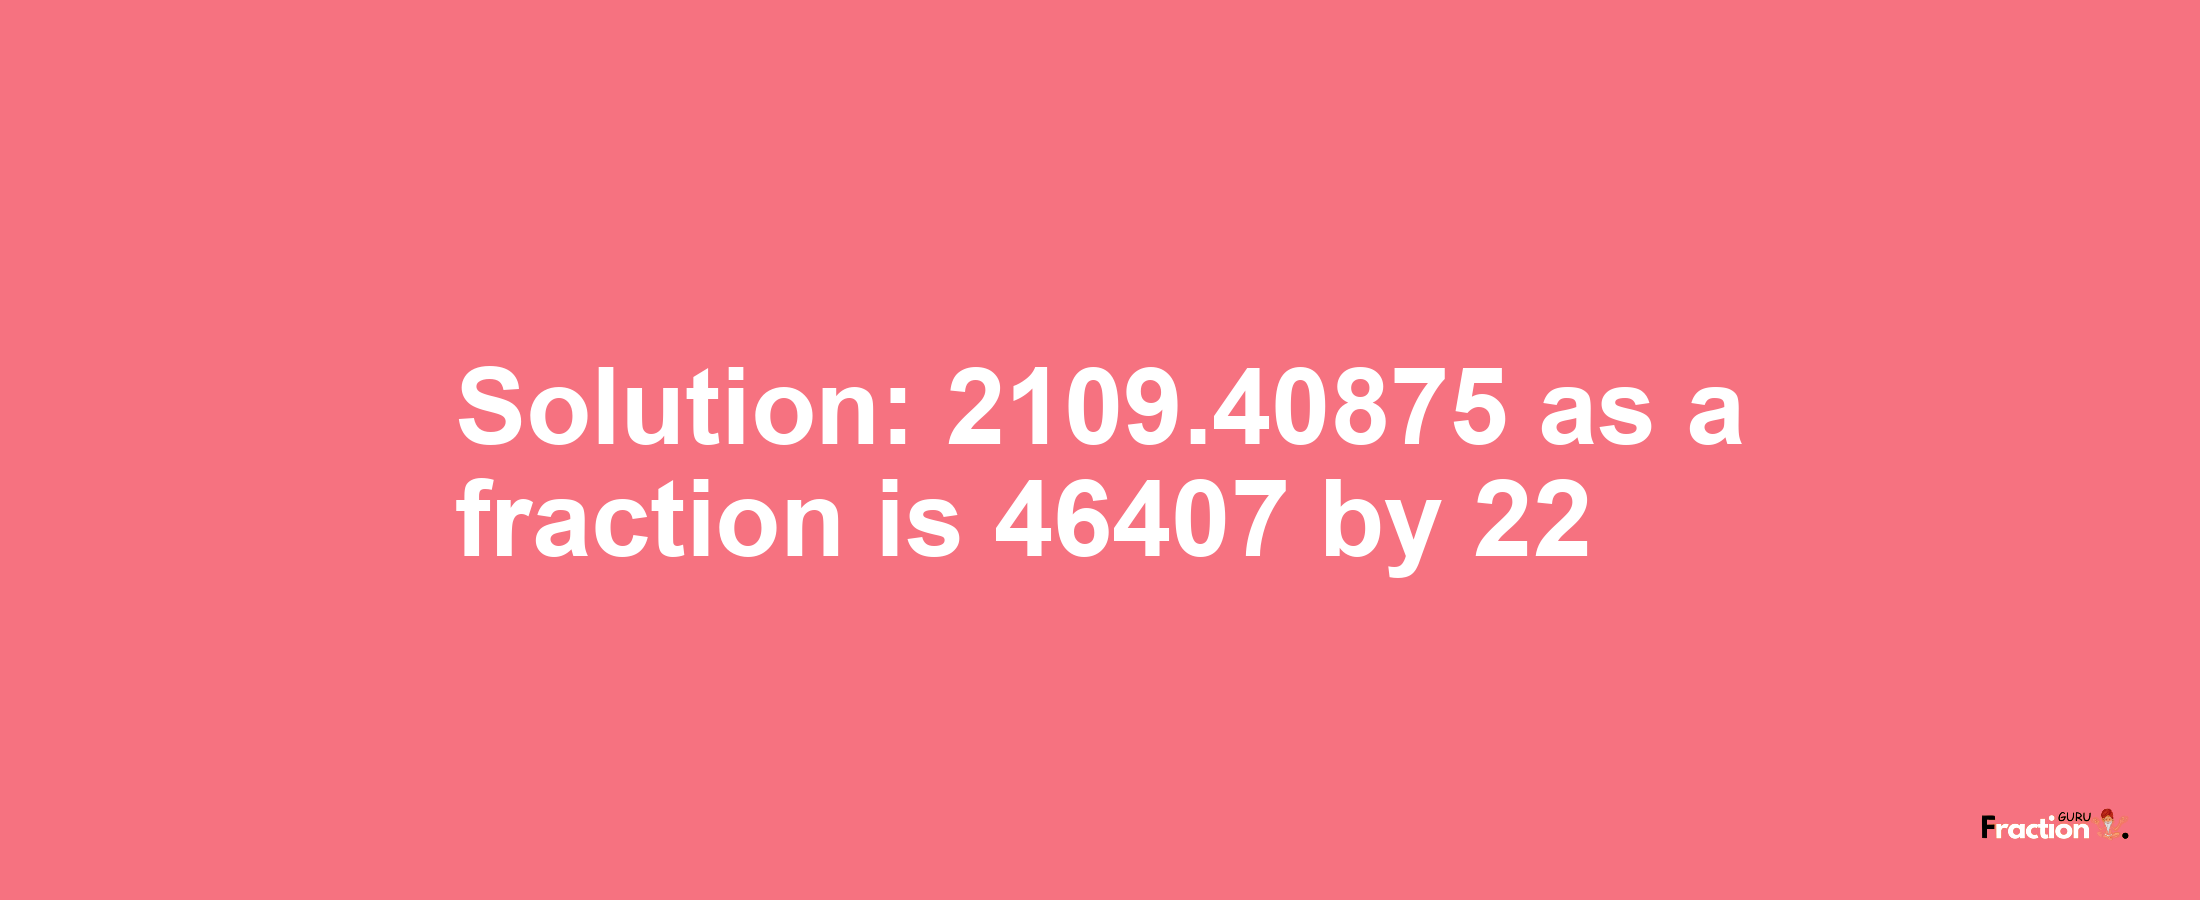 Solution:2109.40875 as a fraction is 46407/22